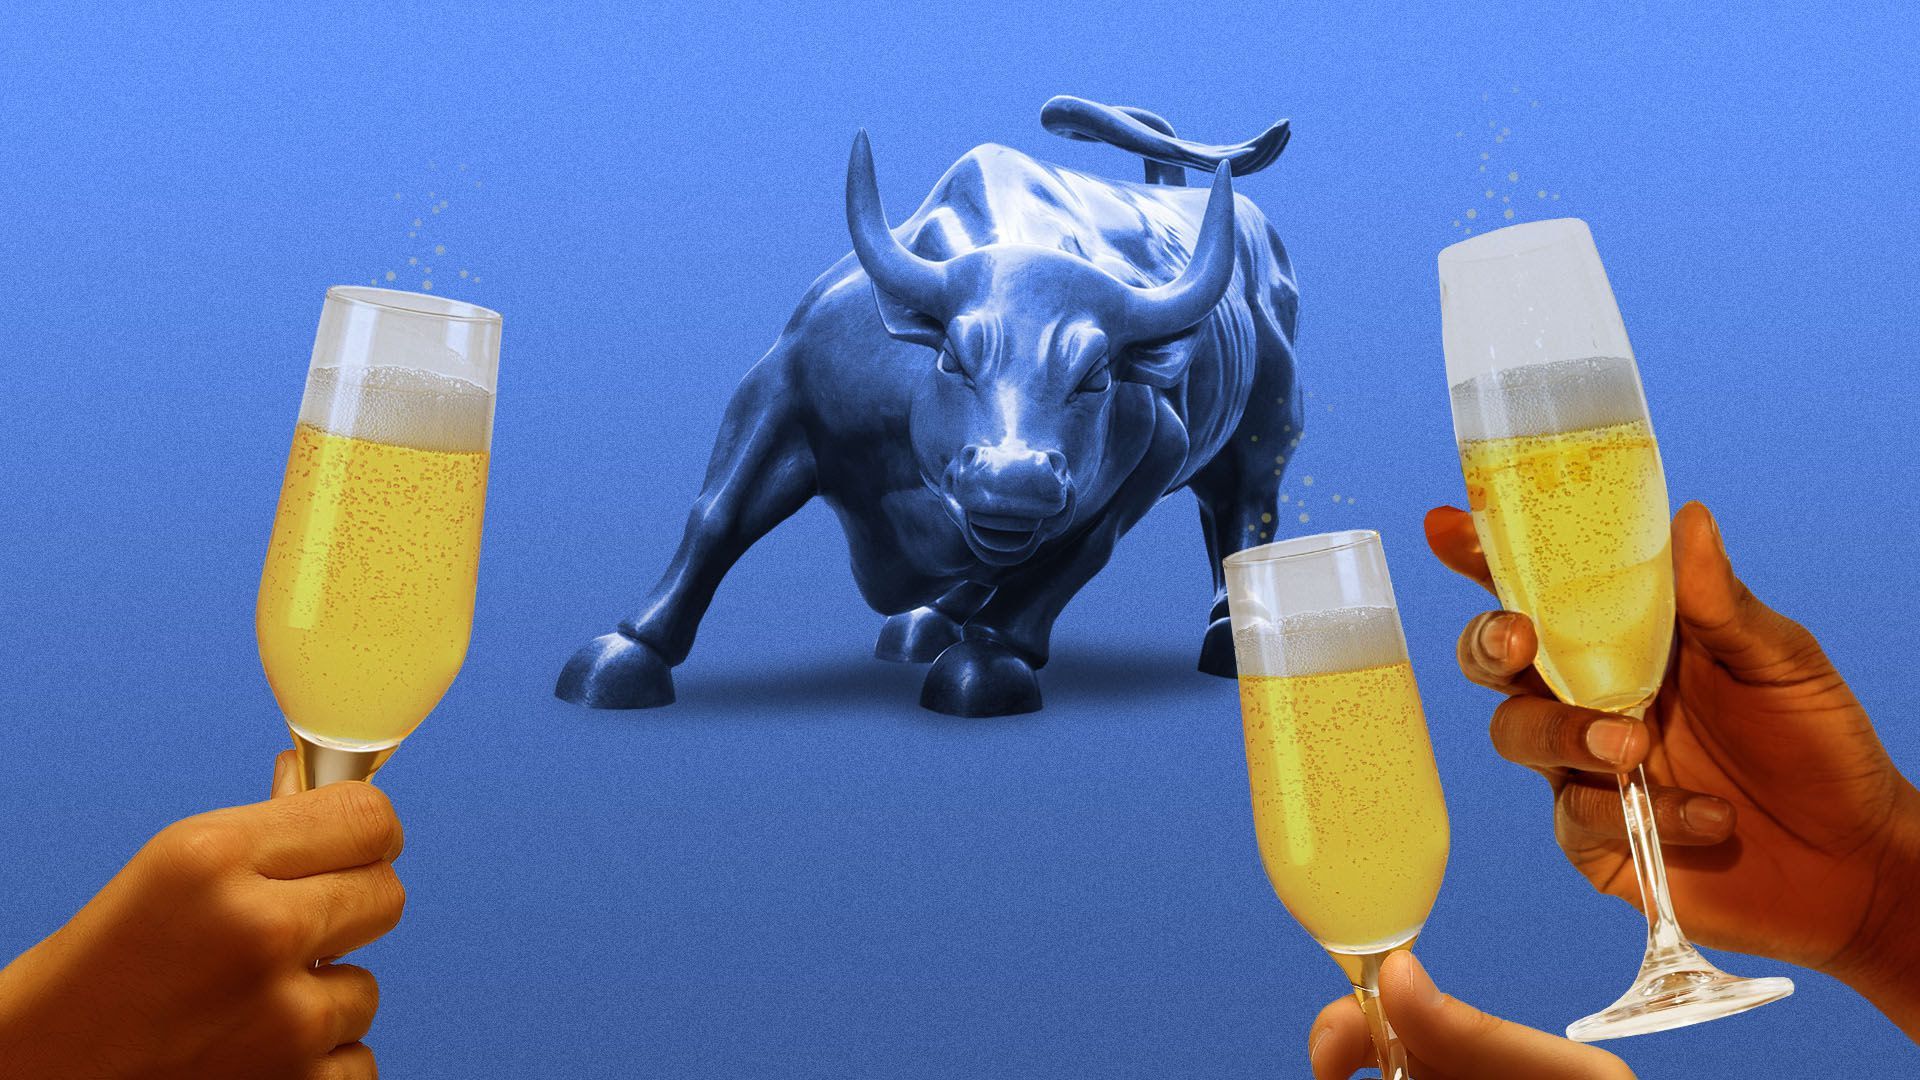 Illustration of stock market bull surrounded by champagne glasses